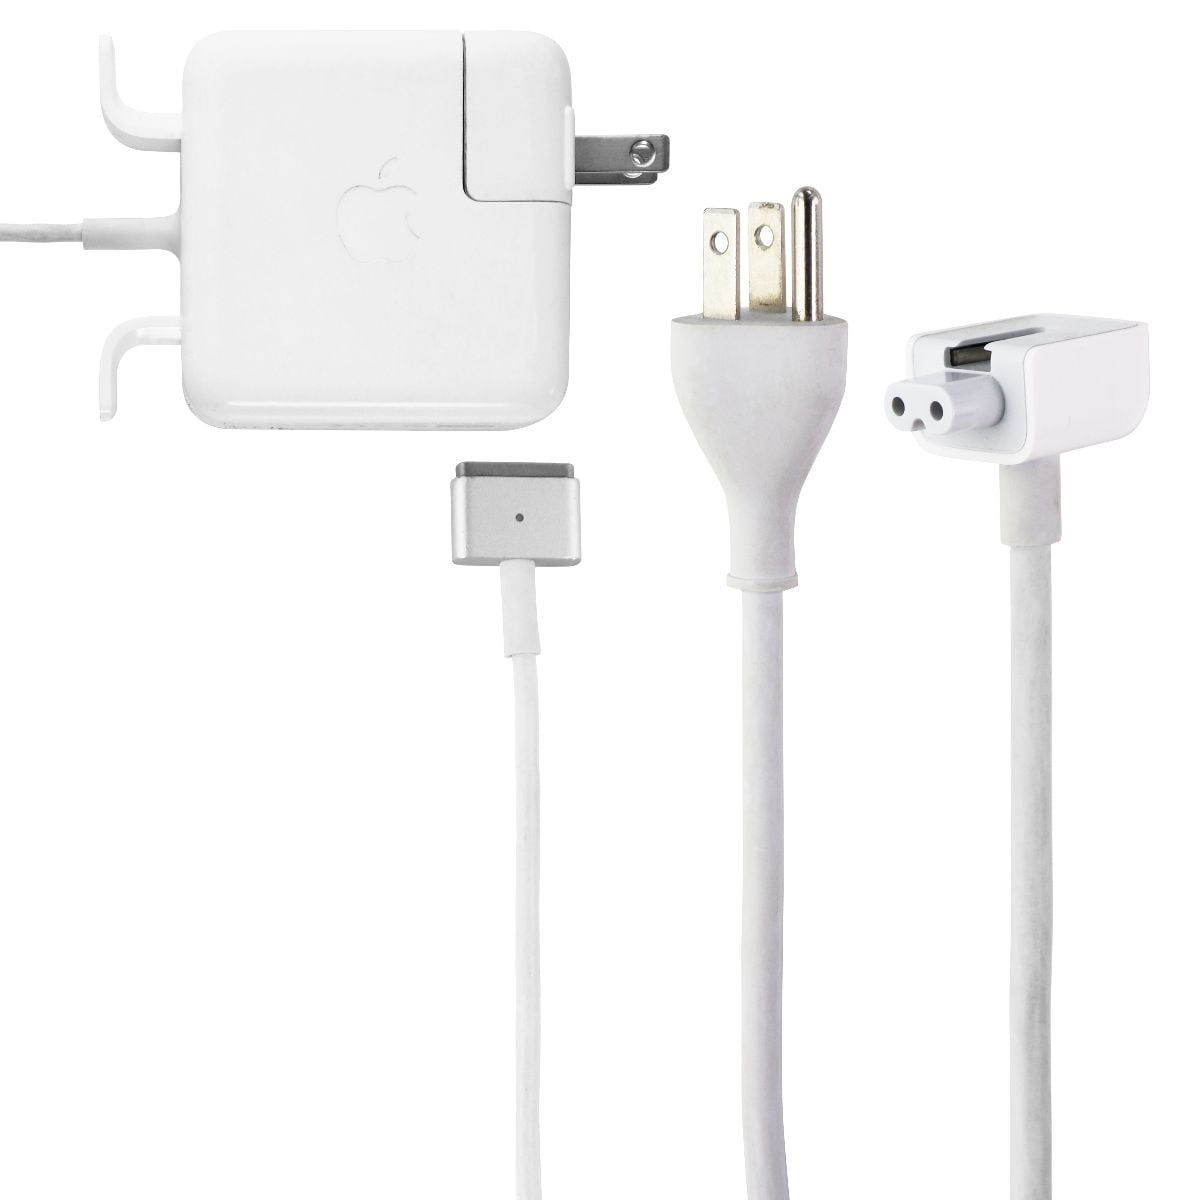 Restored Apple 45-Watt MagSafe 2 Laptop Charger with 3-Prong & Folding Plug  Kit (A1436) (Refurbished)